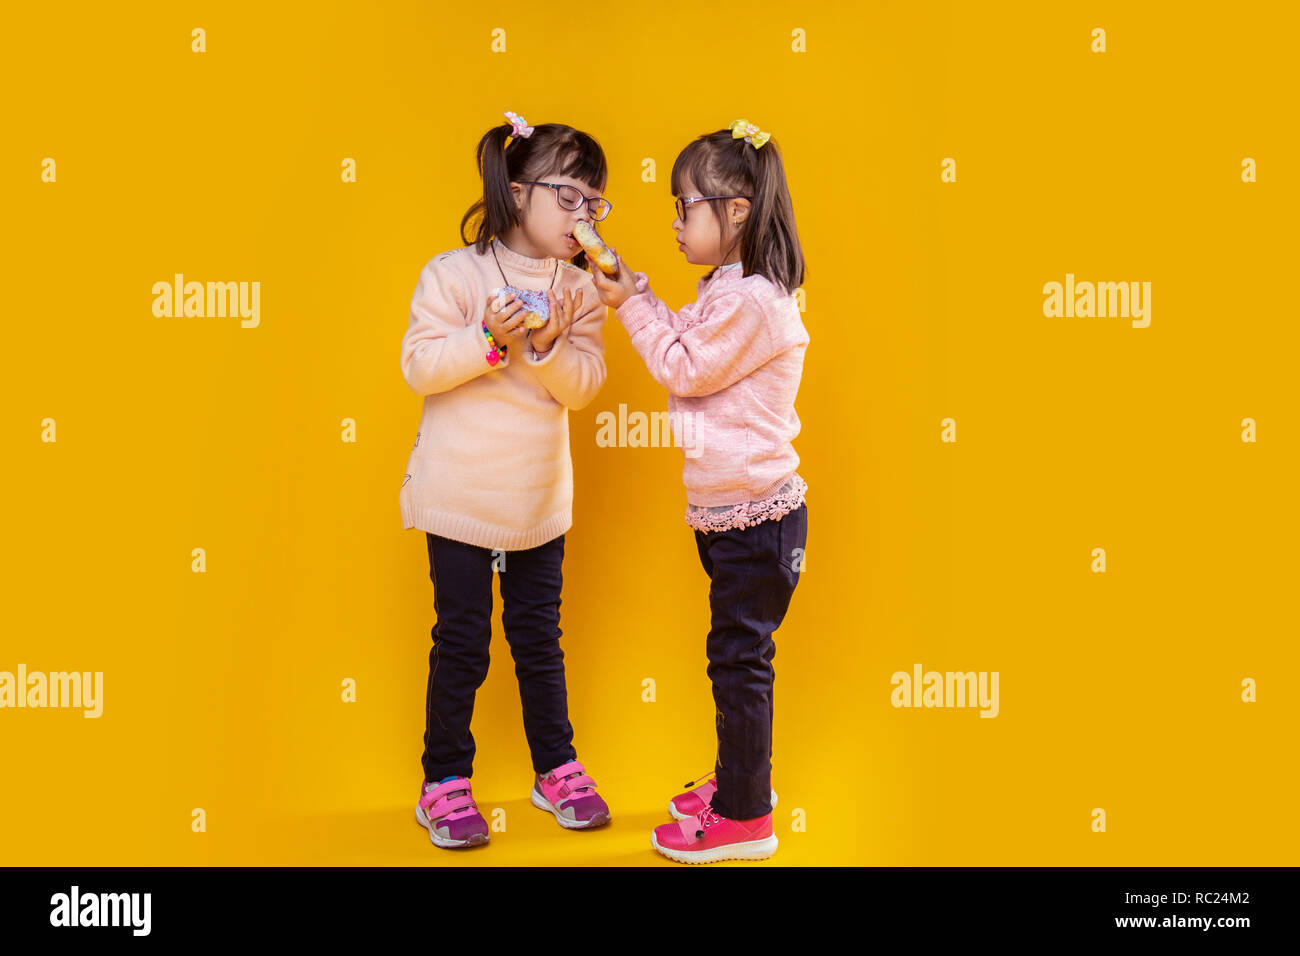 Cute little girl carrying puffy donut while her sister sniffing it Stock Photo